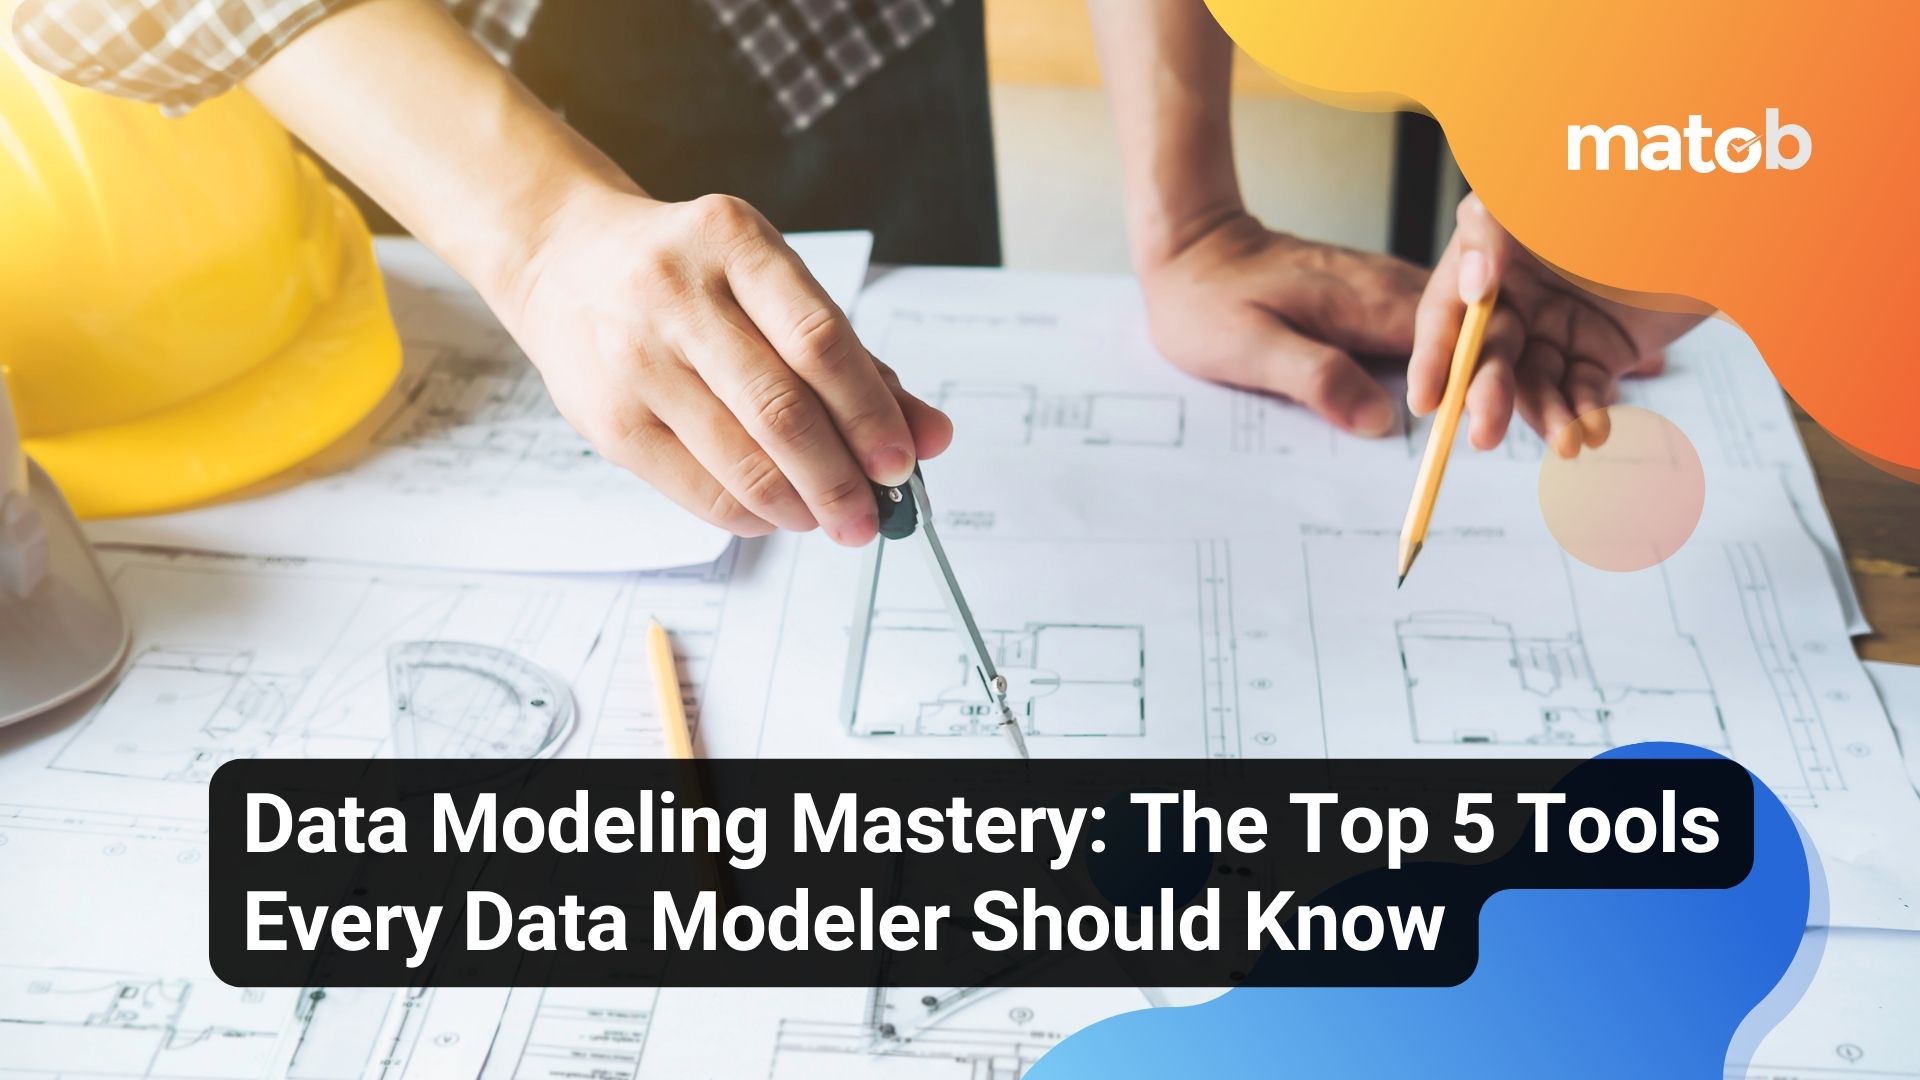 Data Modeling Mastery: The Top 5 Tools Every Data Modeler Should Know